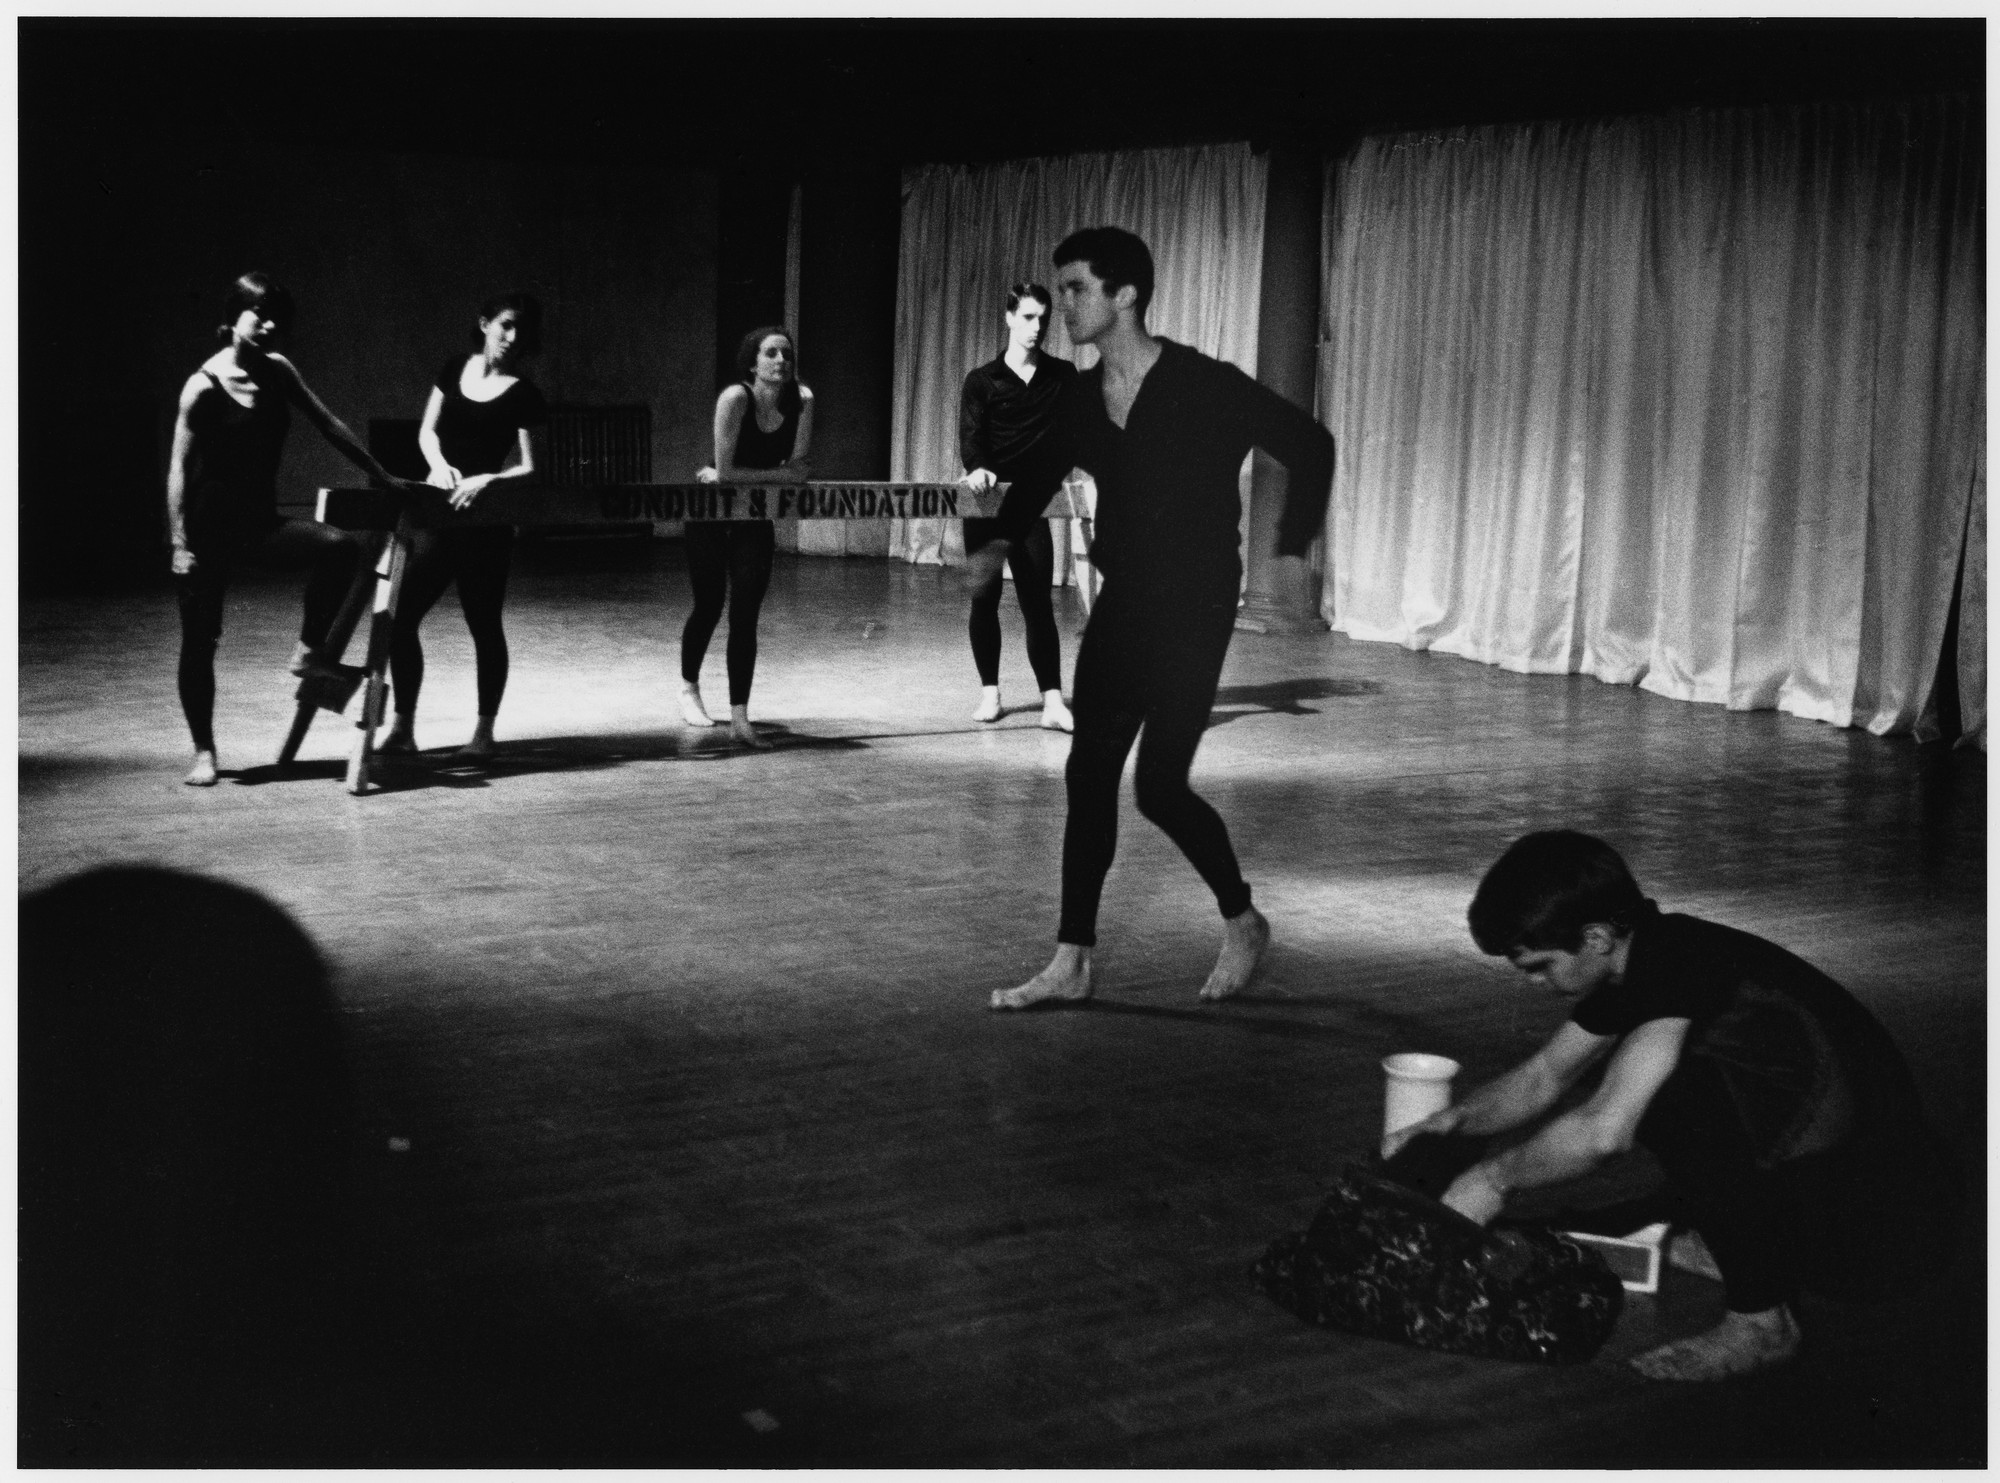 Peter Moore’s photograph of _Terrain_, 1963. Performed at Judson Memorial Church, April 28, 1963. Pictured, from left: William Davis and Albert Reid (foreground); Yvonne Rainer, Judith Dunn, Trisha Brown, and Steve Paxton (background). © Barbara Moore/Licensed by VAGA, New York, NY. Courtesy Paula Cooper Gallery, New York